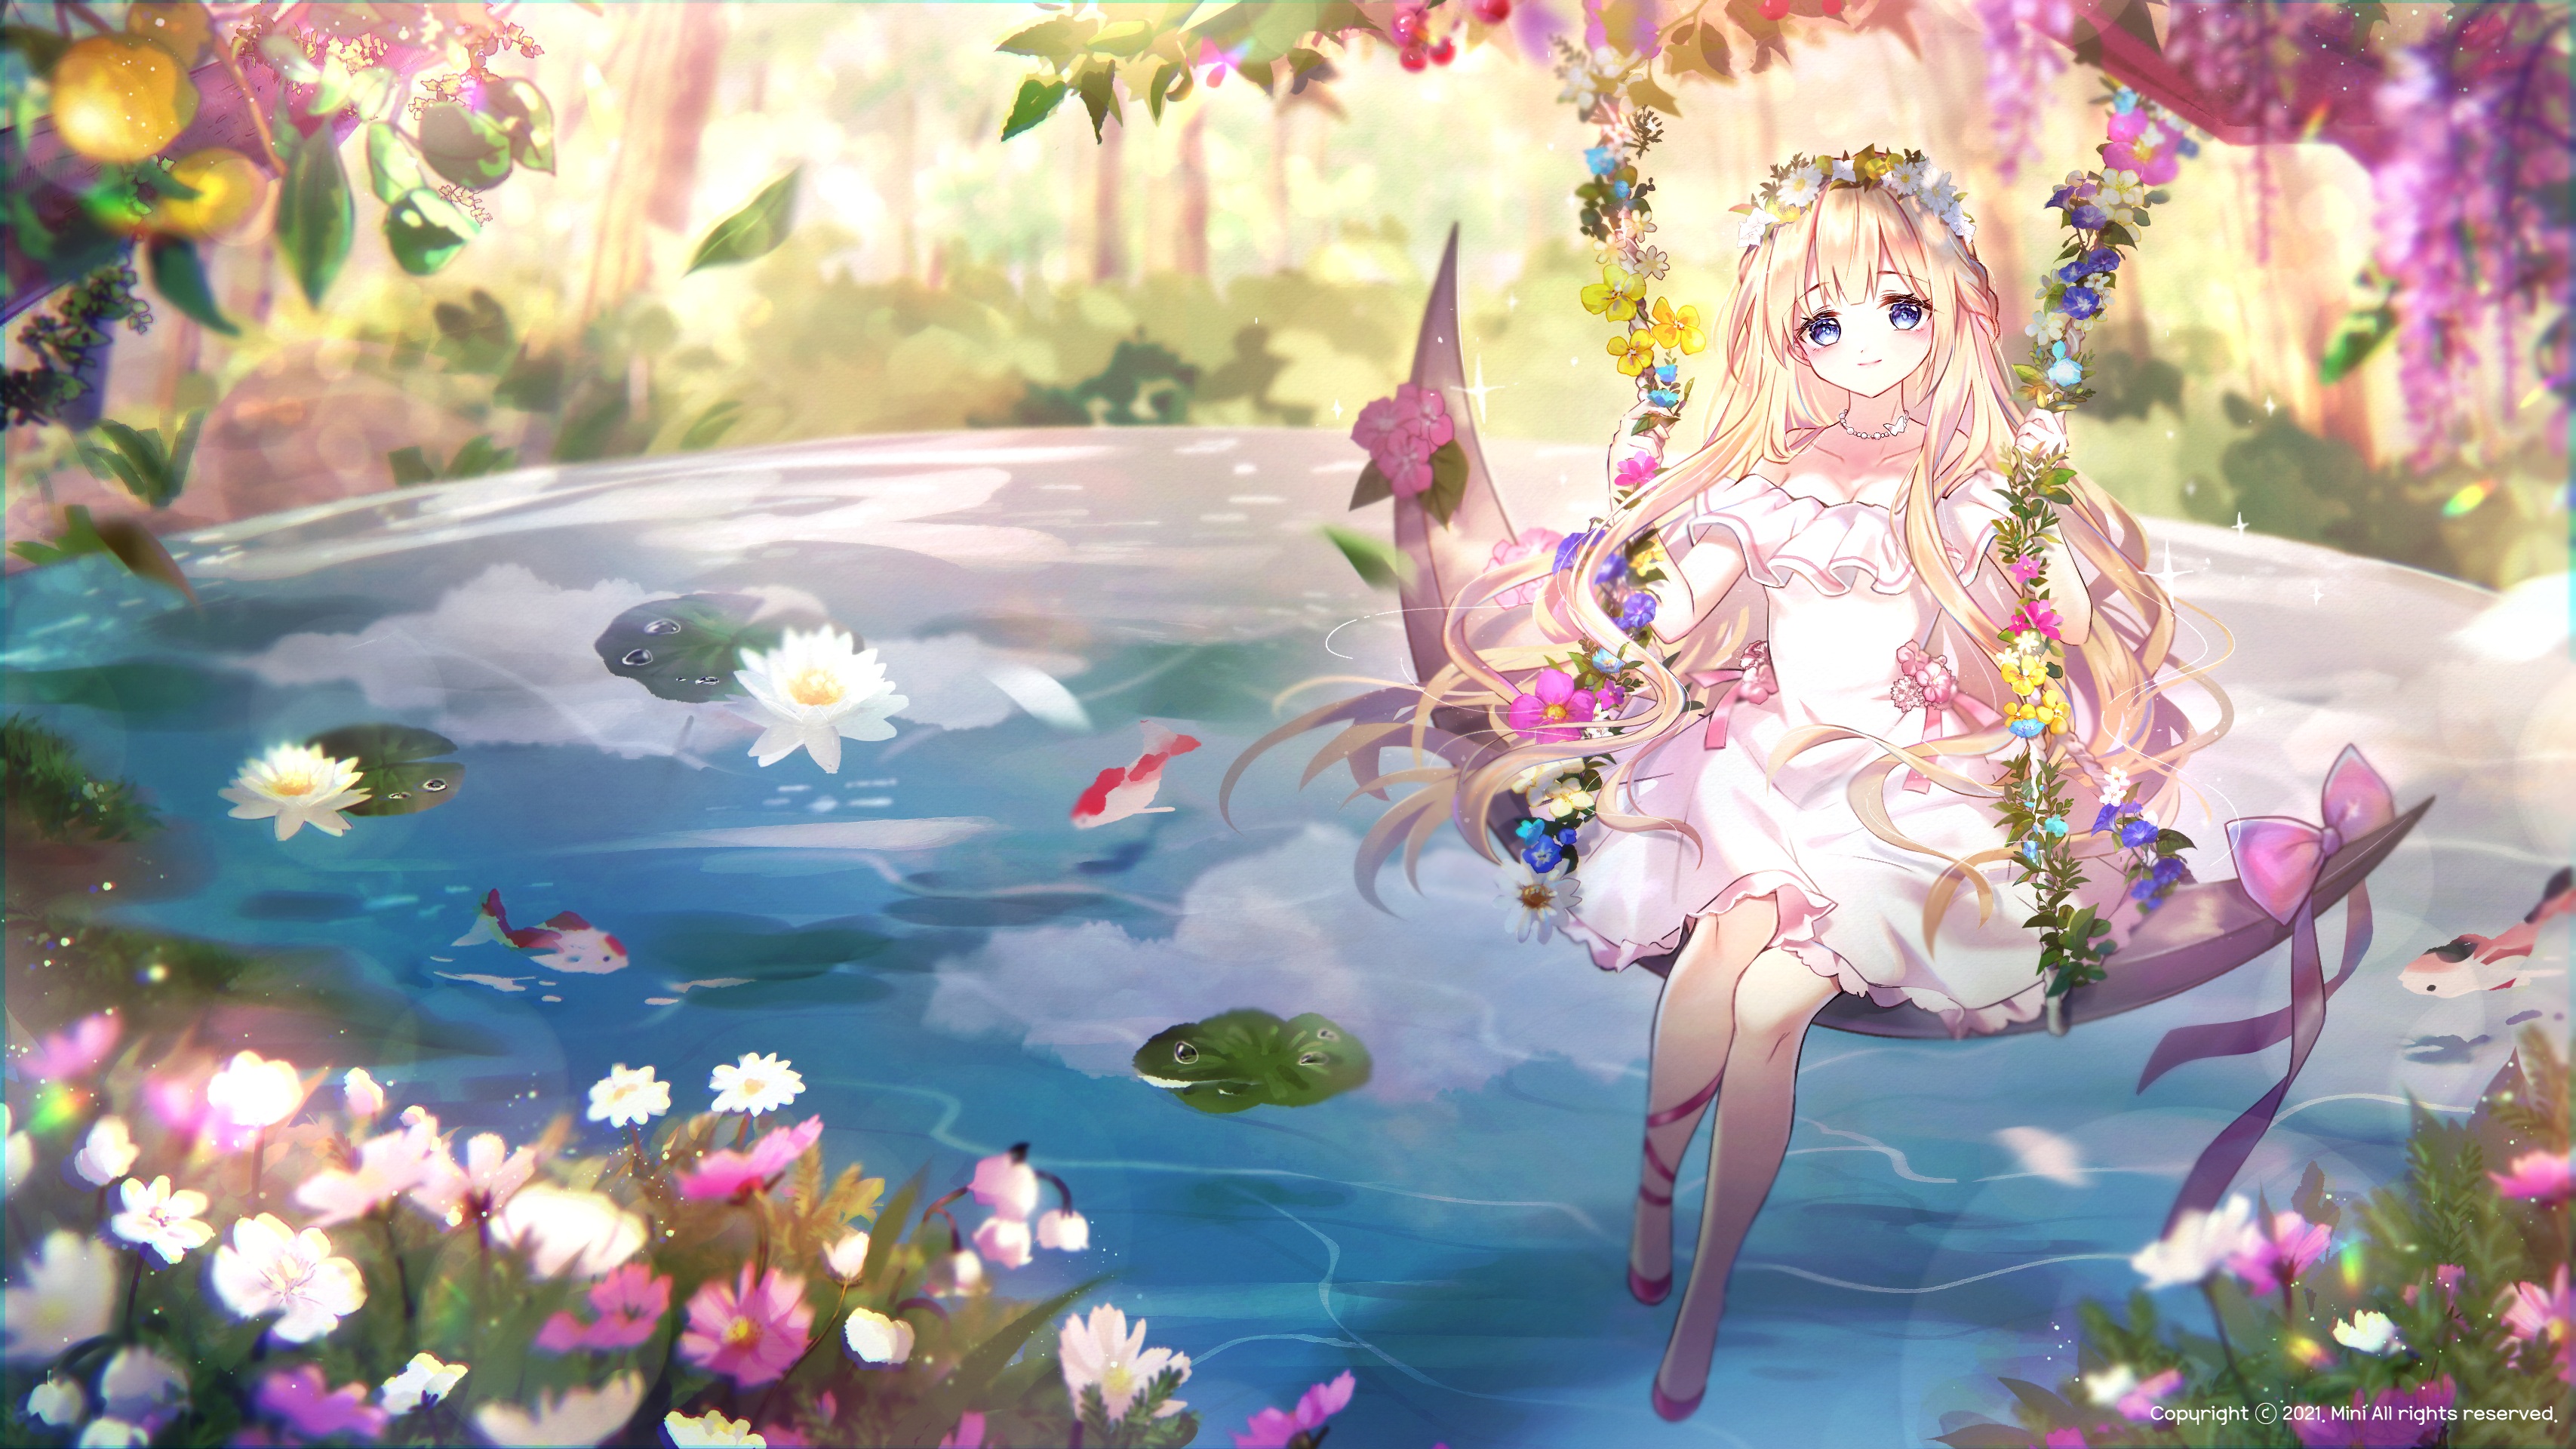 Anime 3414x1920 anime anime girls fantasy art fantasy girl swings thighs together pond long hair flowers plants looking at viewer women outdoors nature dress blonde